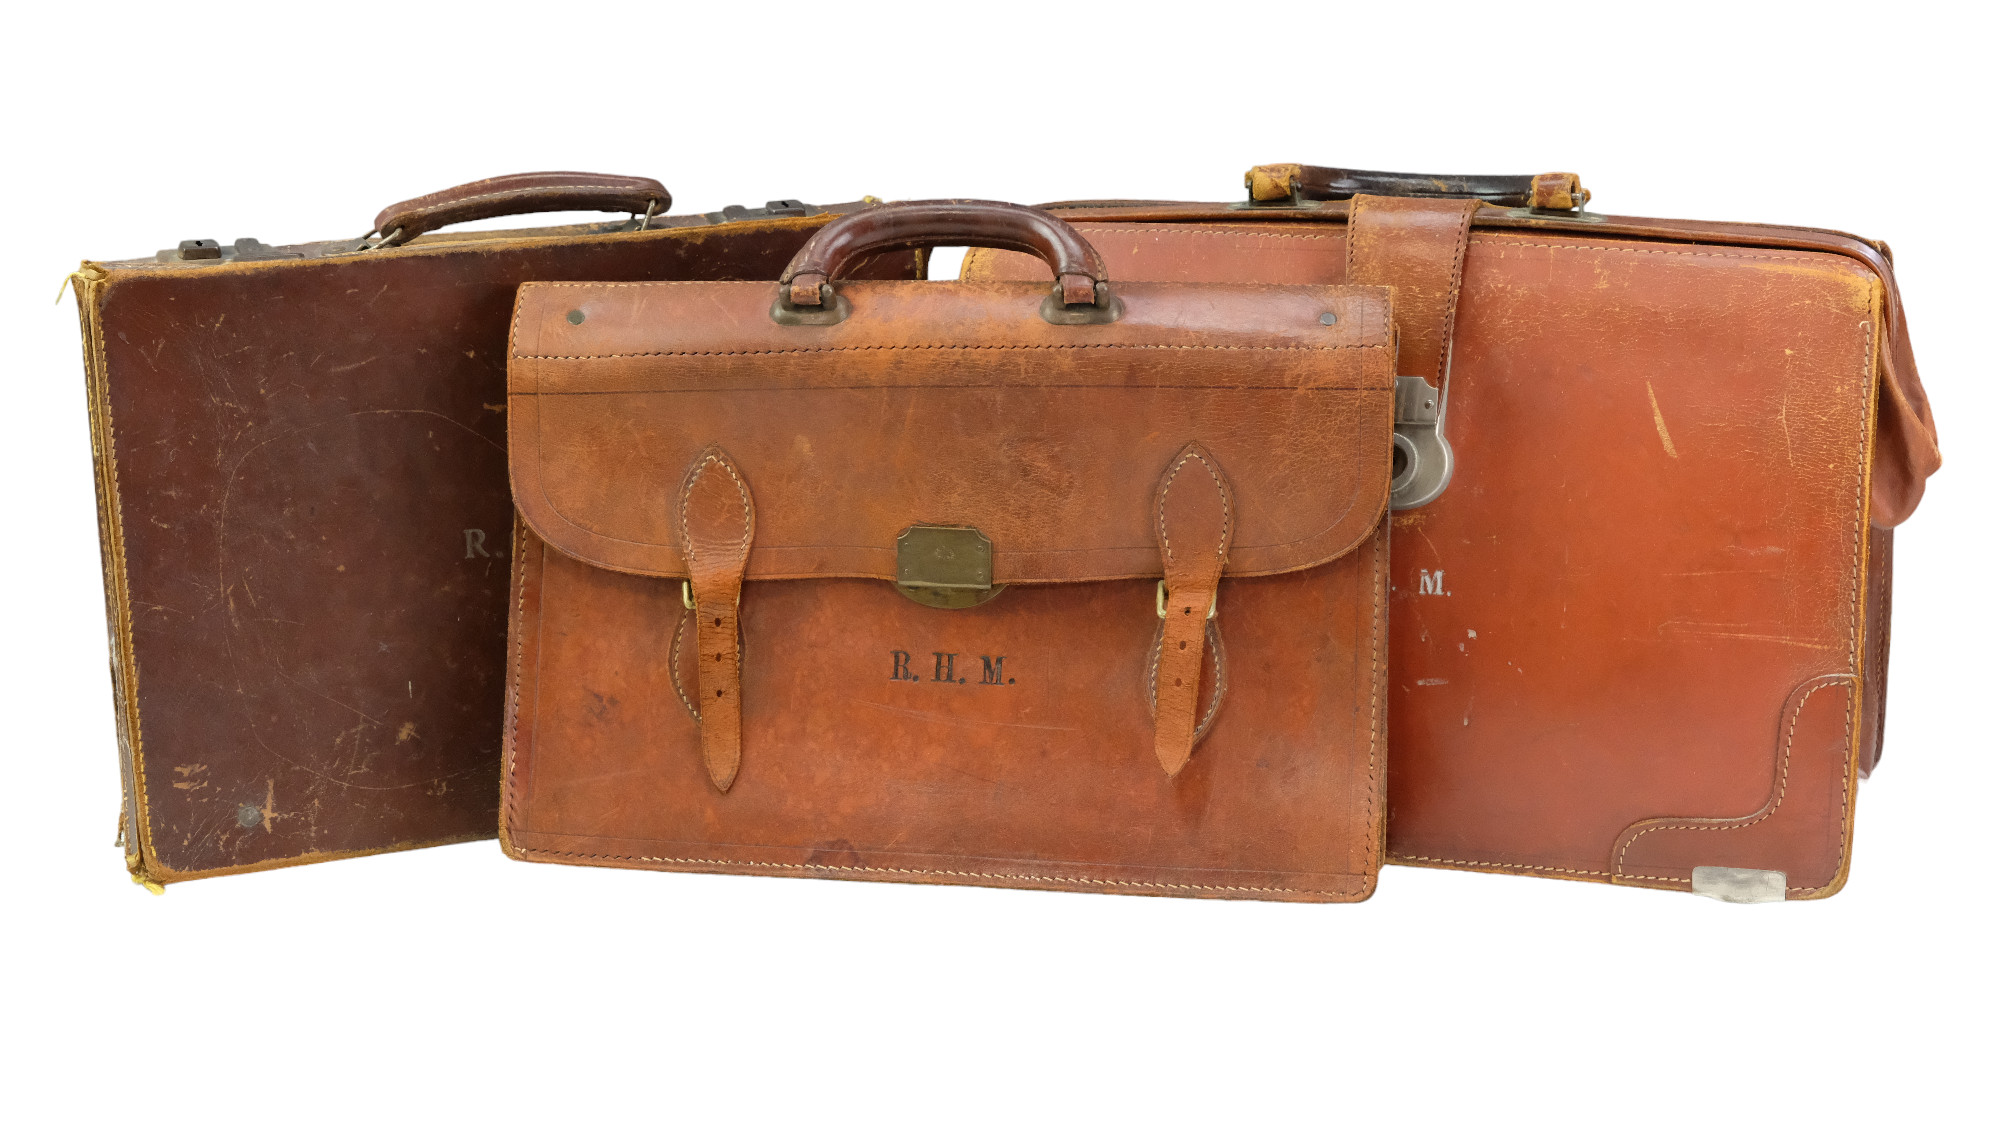 Three vintage leather bags / satchels, early-to-mid 20th Century, largest 43 x 28 x 15 cm